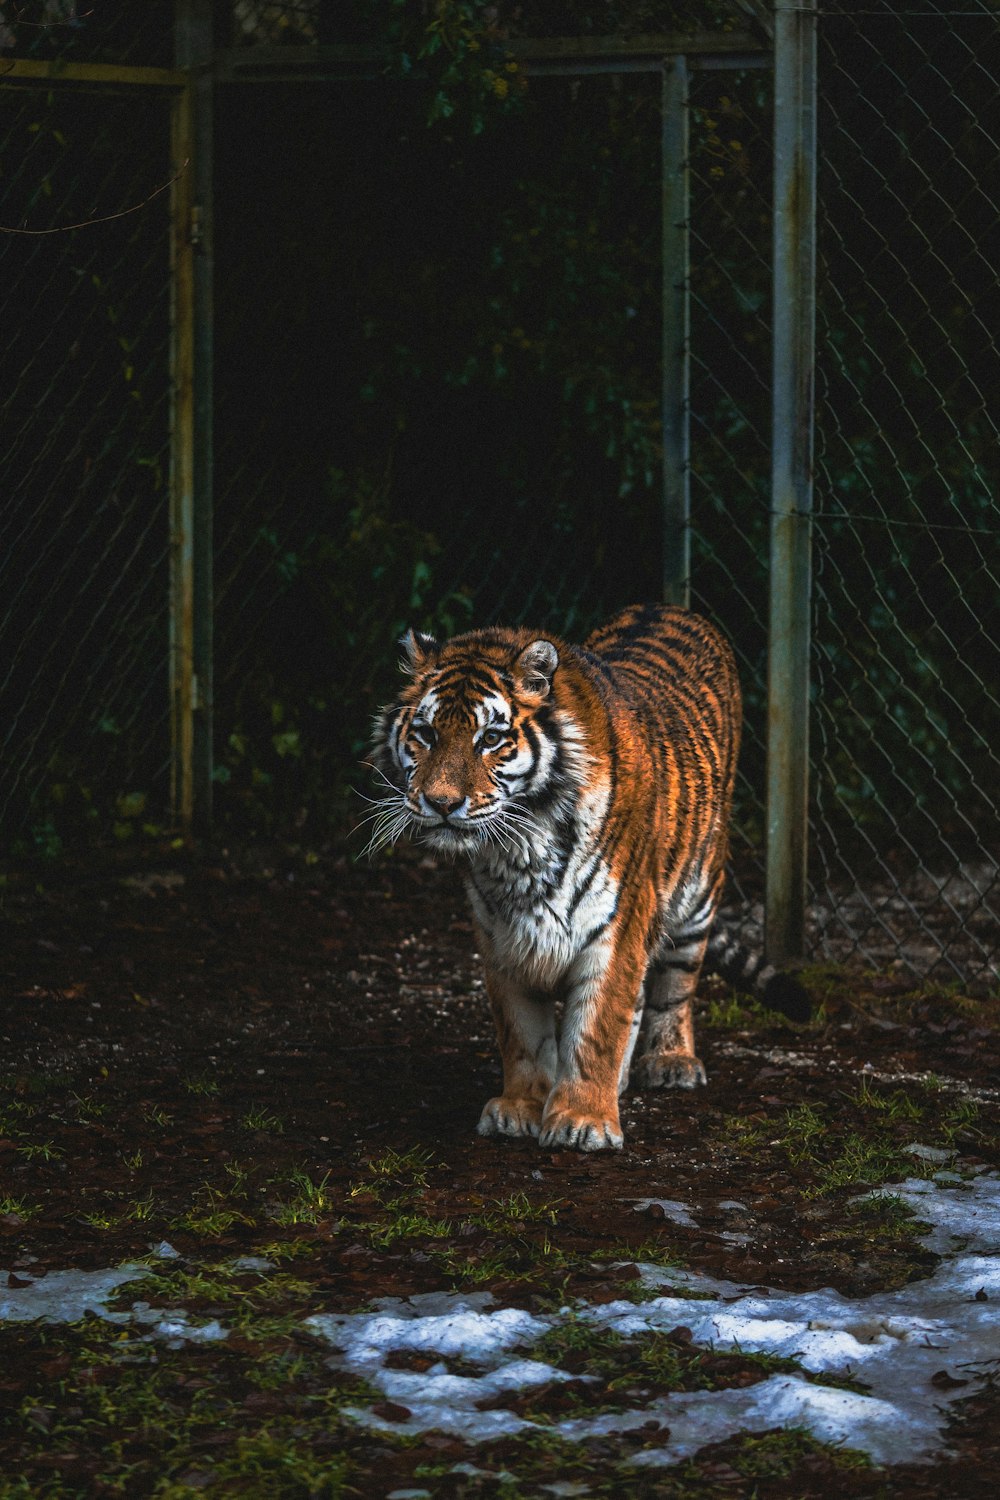 a tiger walking in a fenced in area